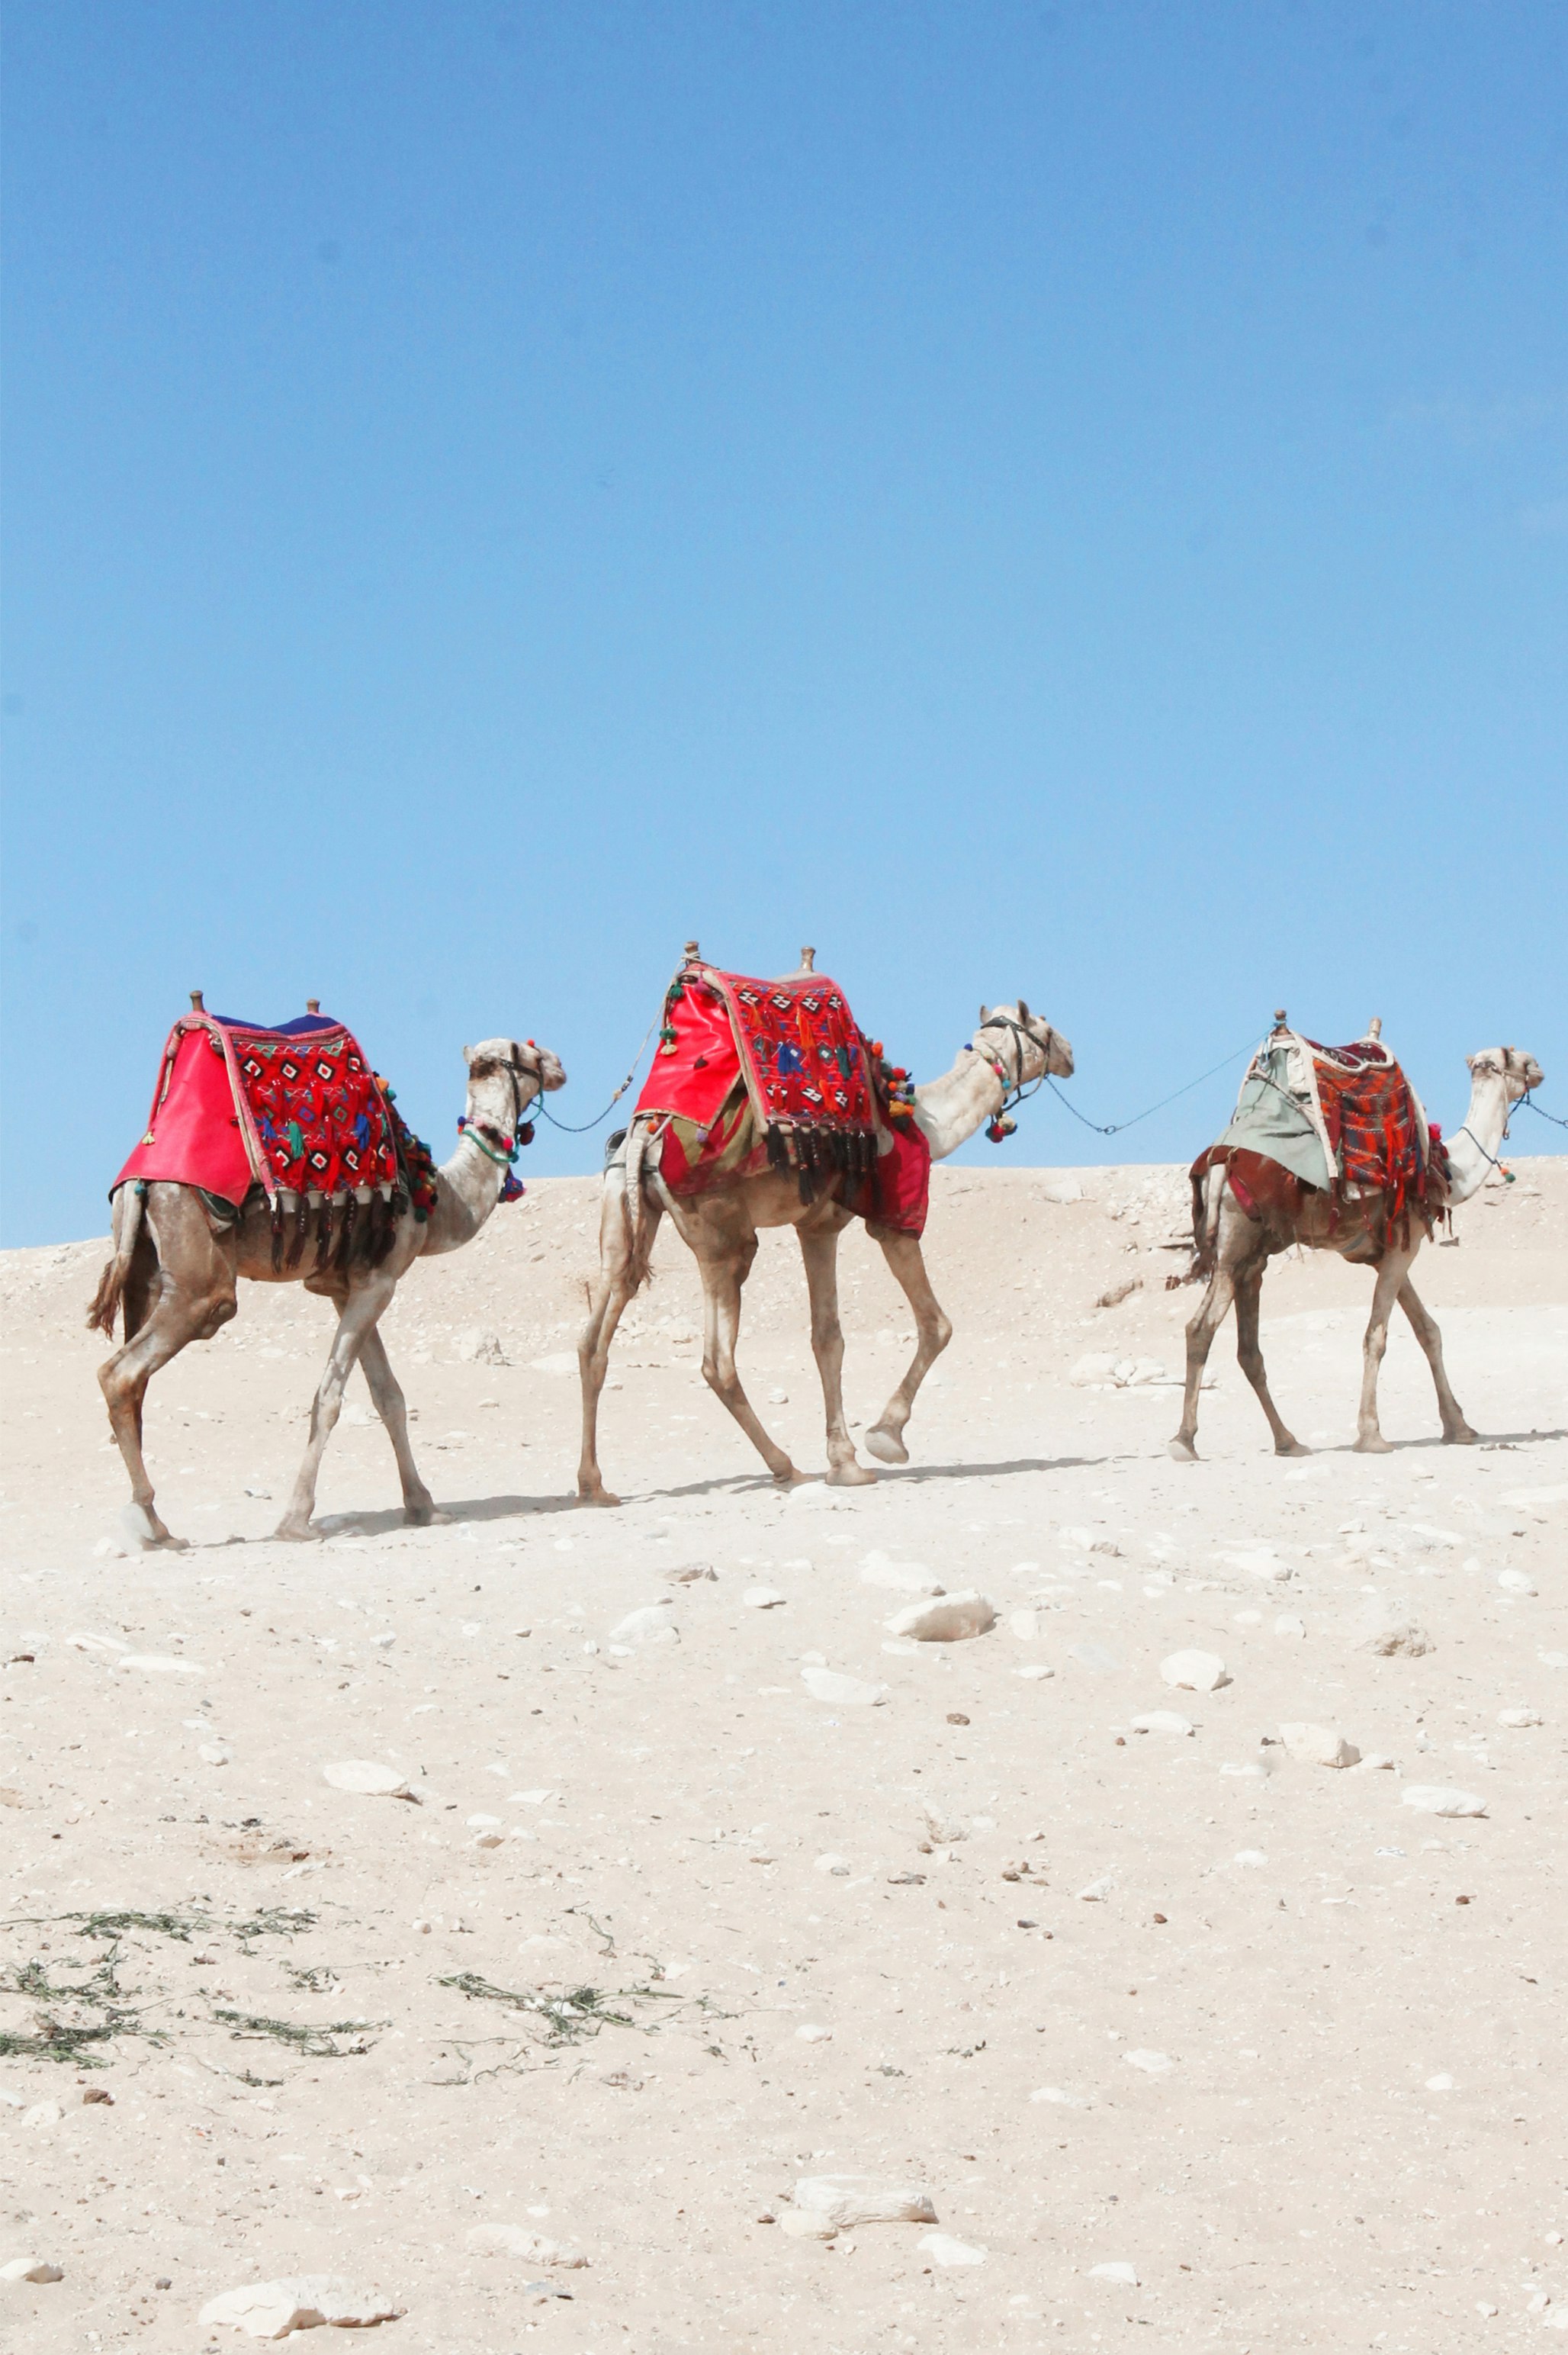 group of people riding camels on white sand during daytime